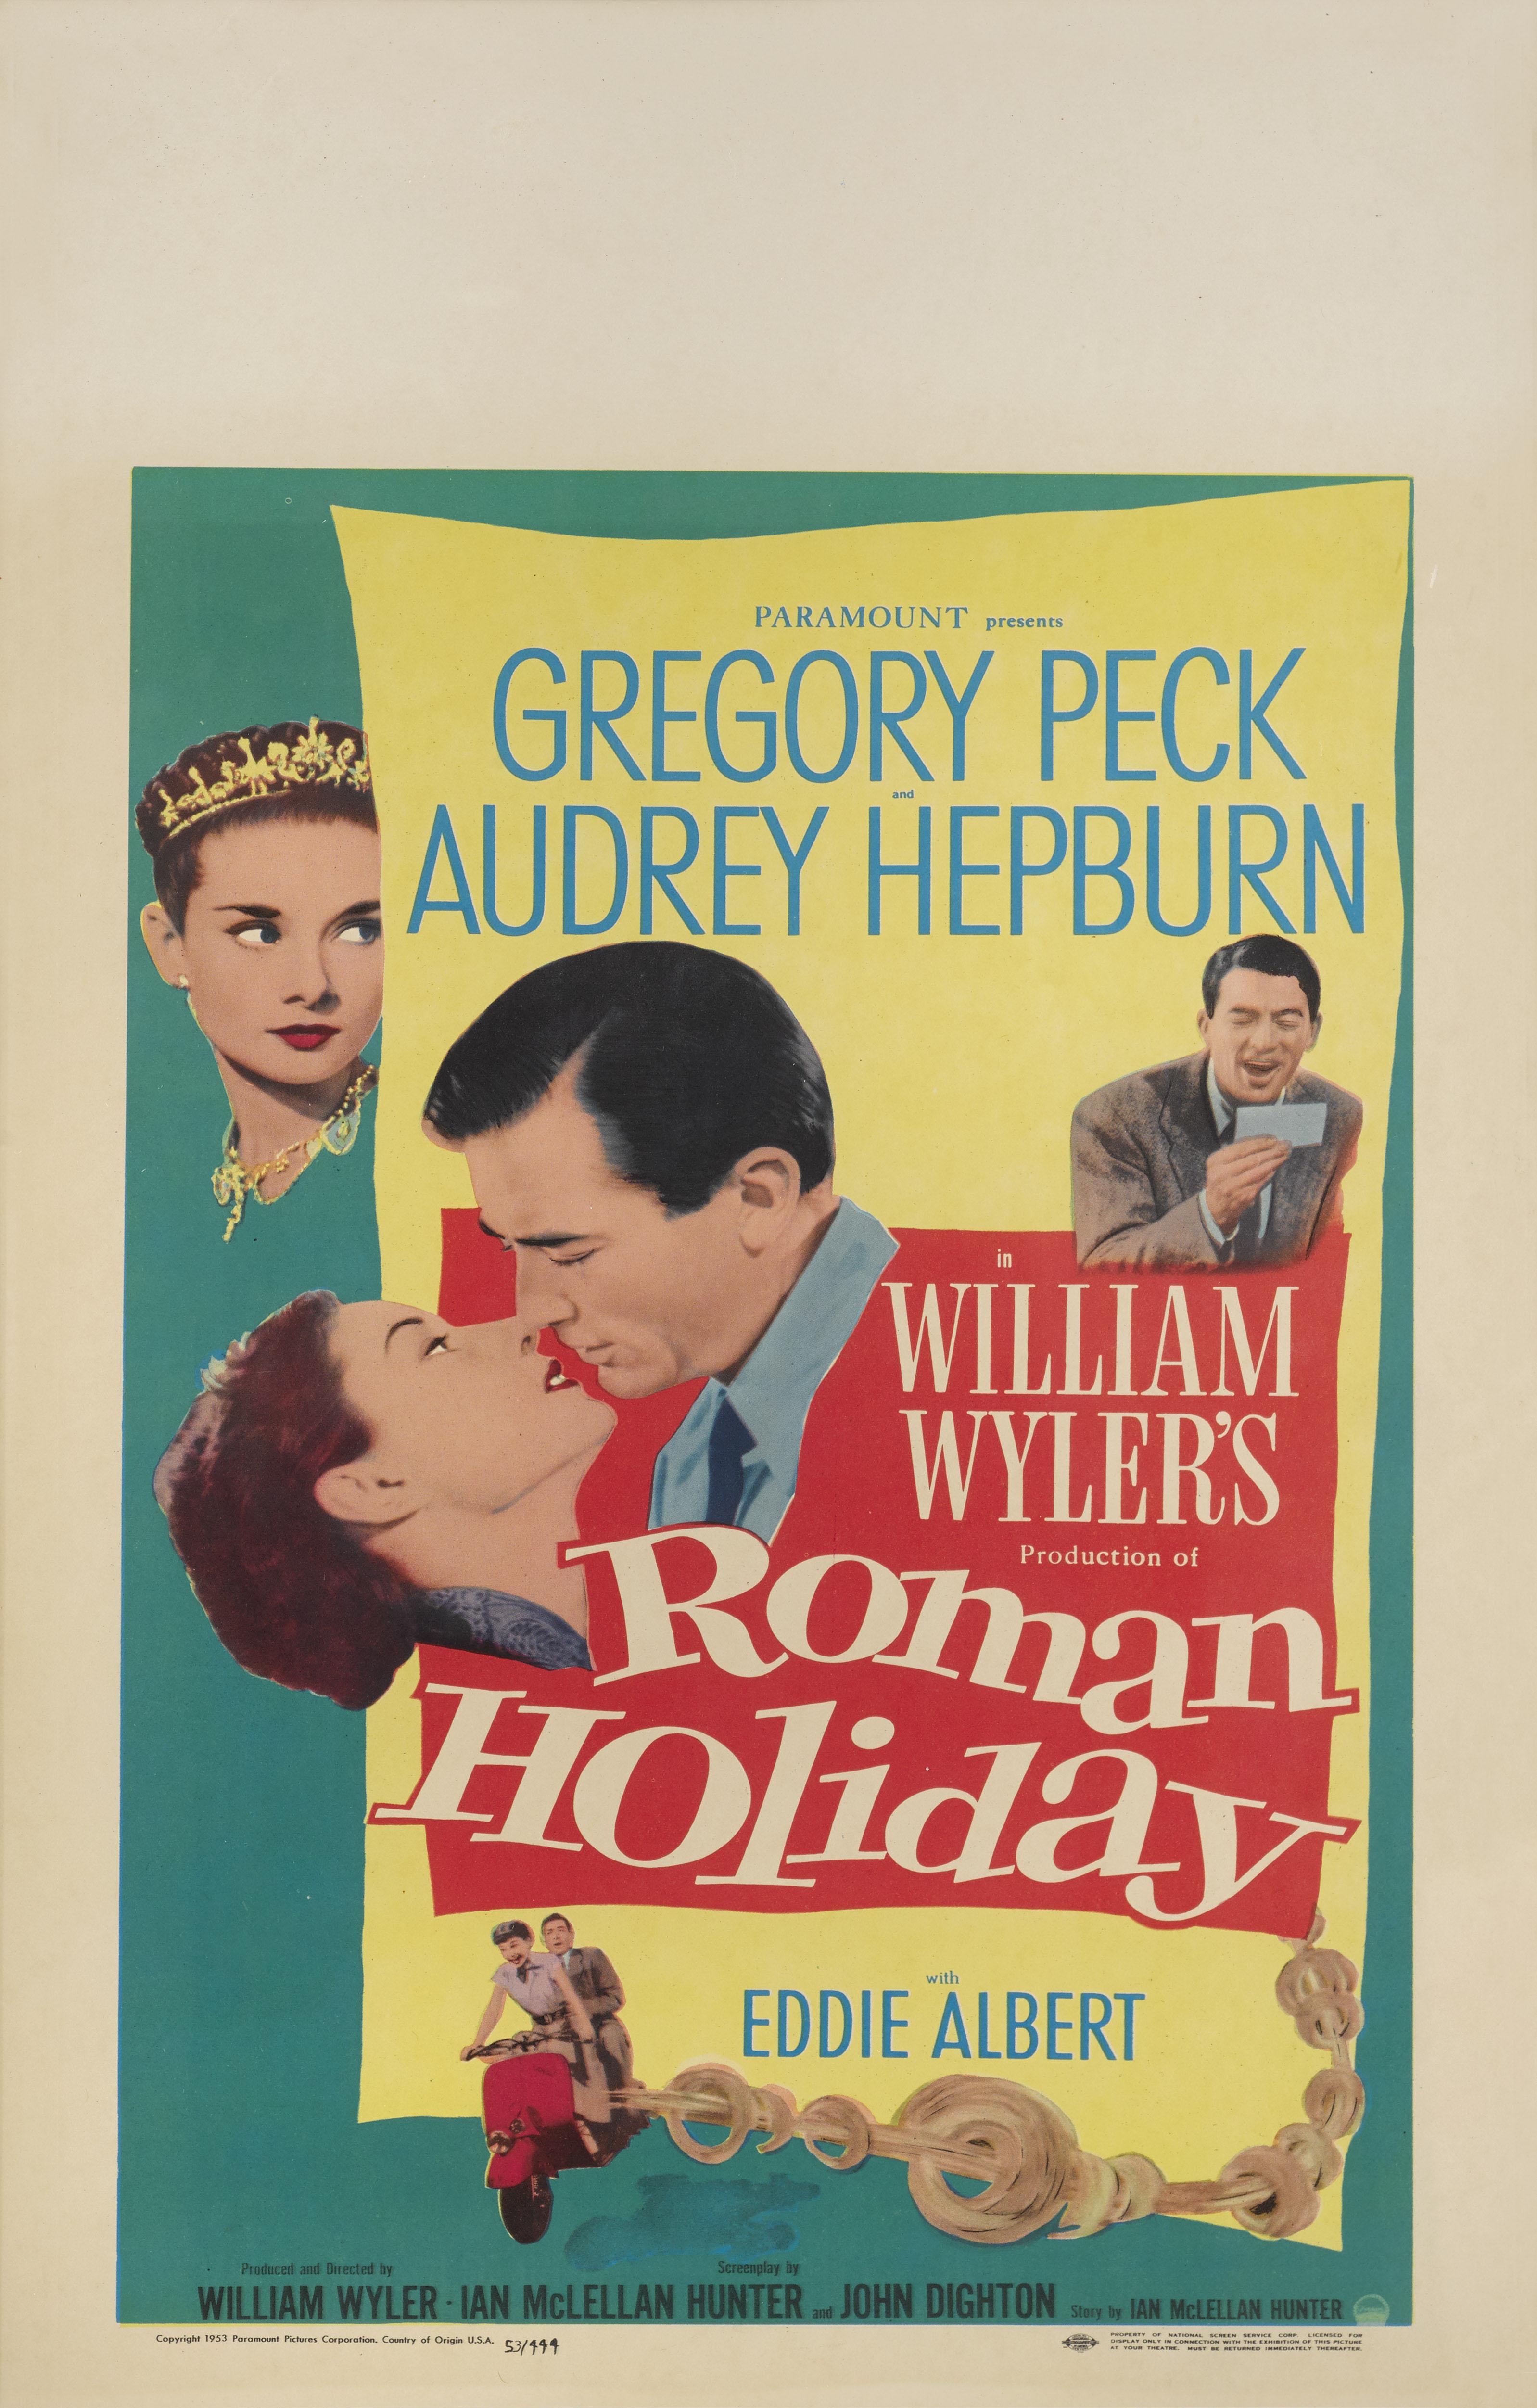 Original US film poster for the 1953 Classic.
This romantic comedy was directed and produced by William Wyler, and stars Audrey Hepburn and Gregory Peck. Hepburn won an Academy Award for Best Actress for her performance. The film also won two other